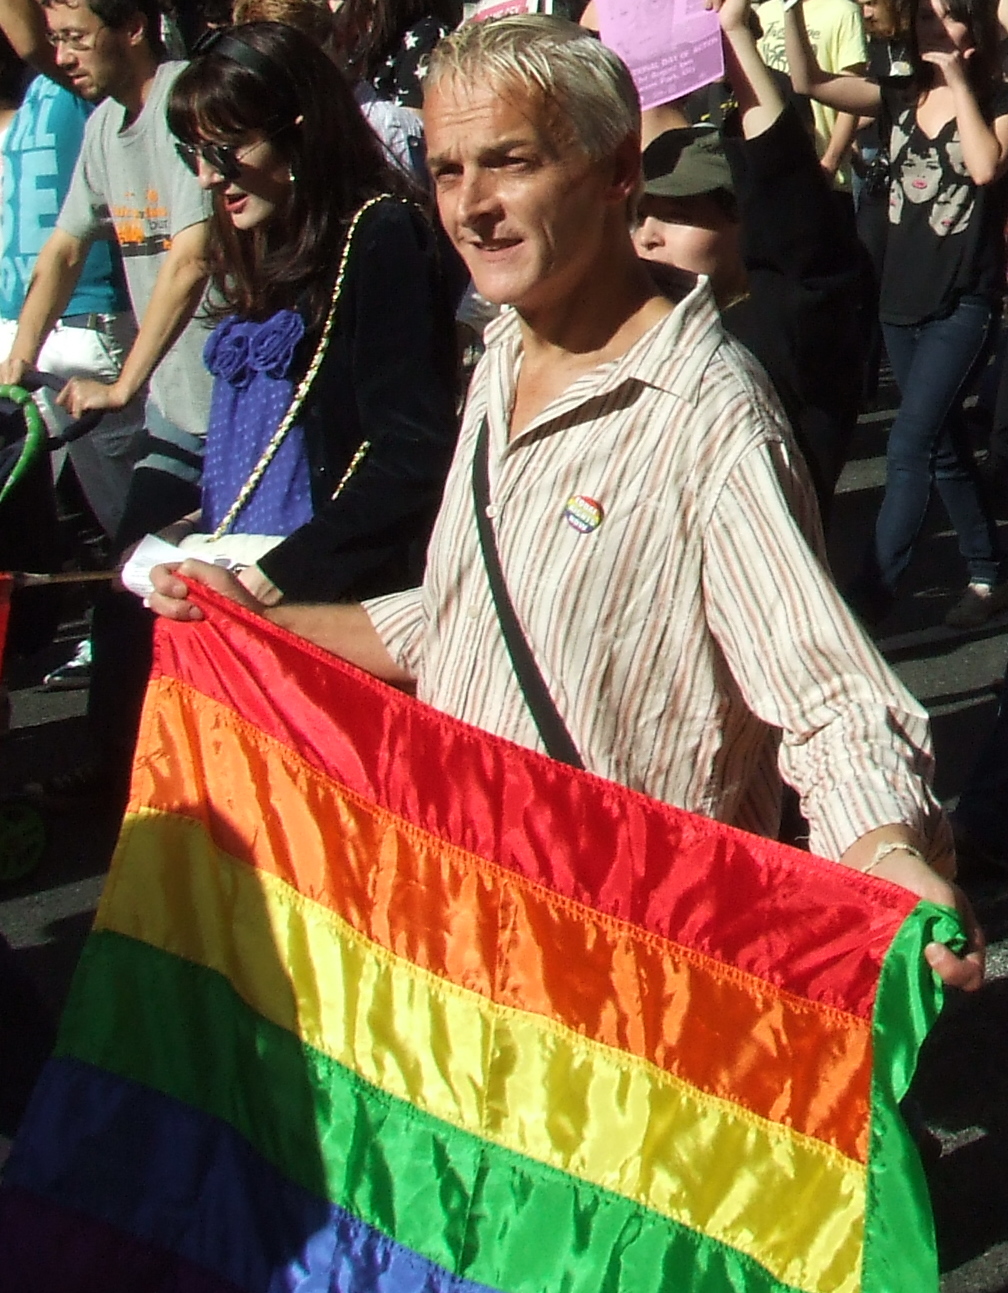 a man carrying a large rainbow flag in a city parade